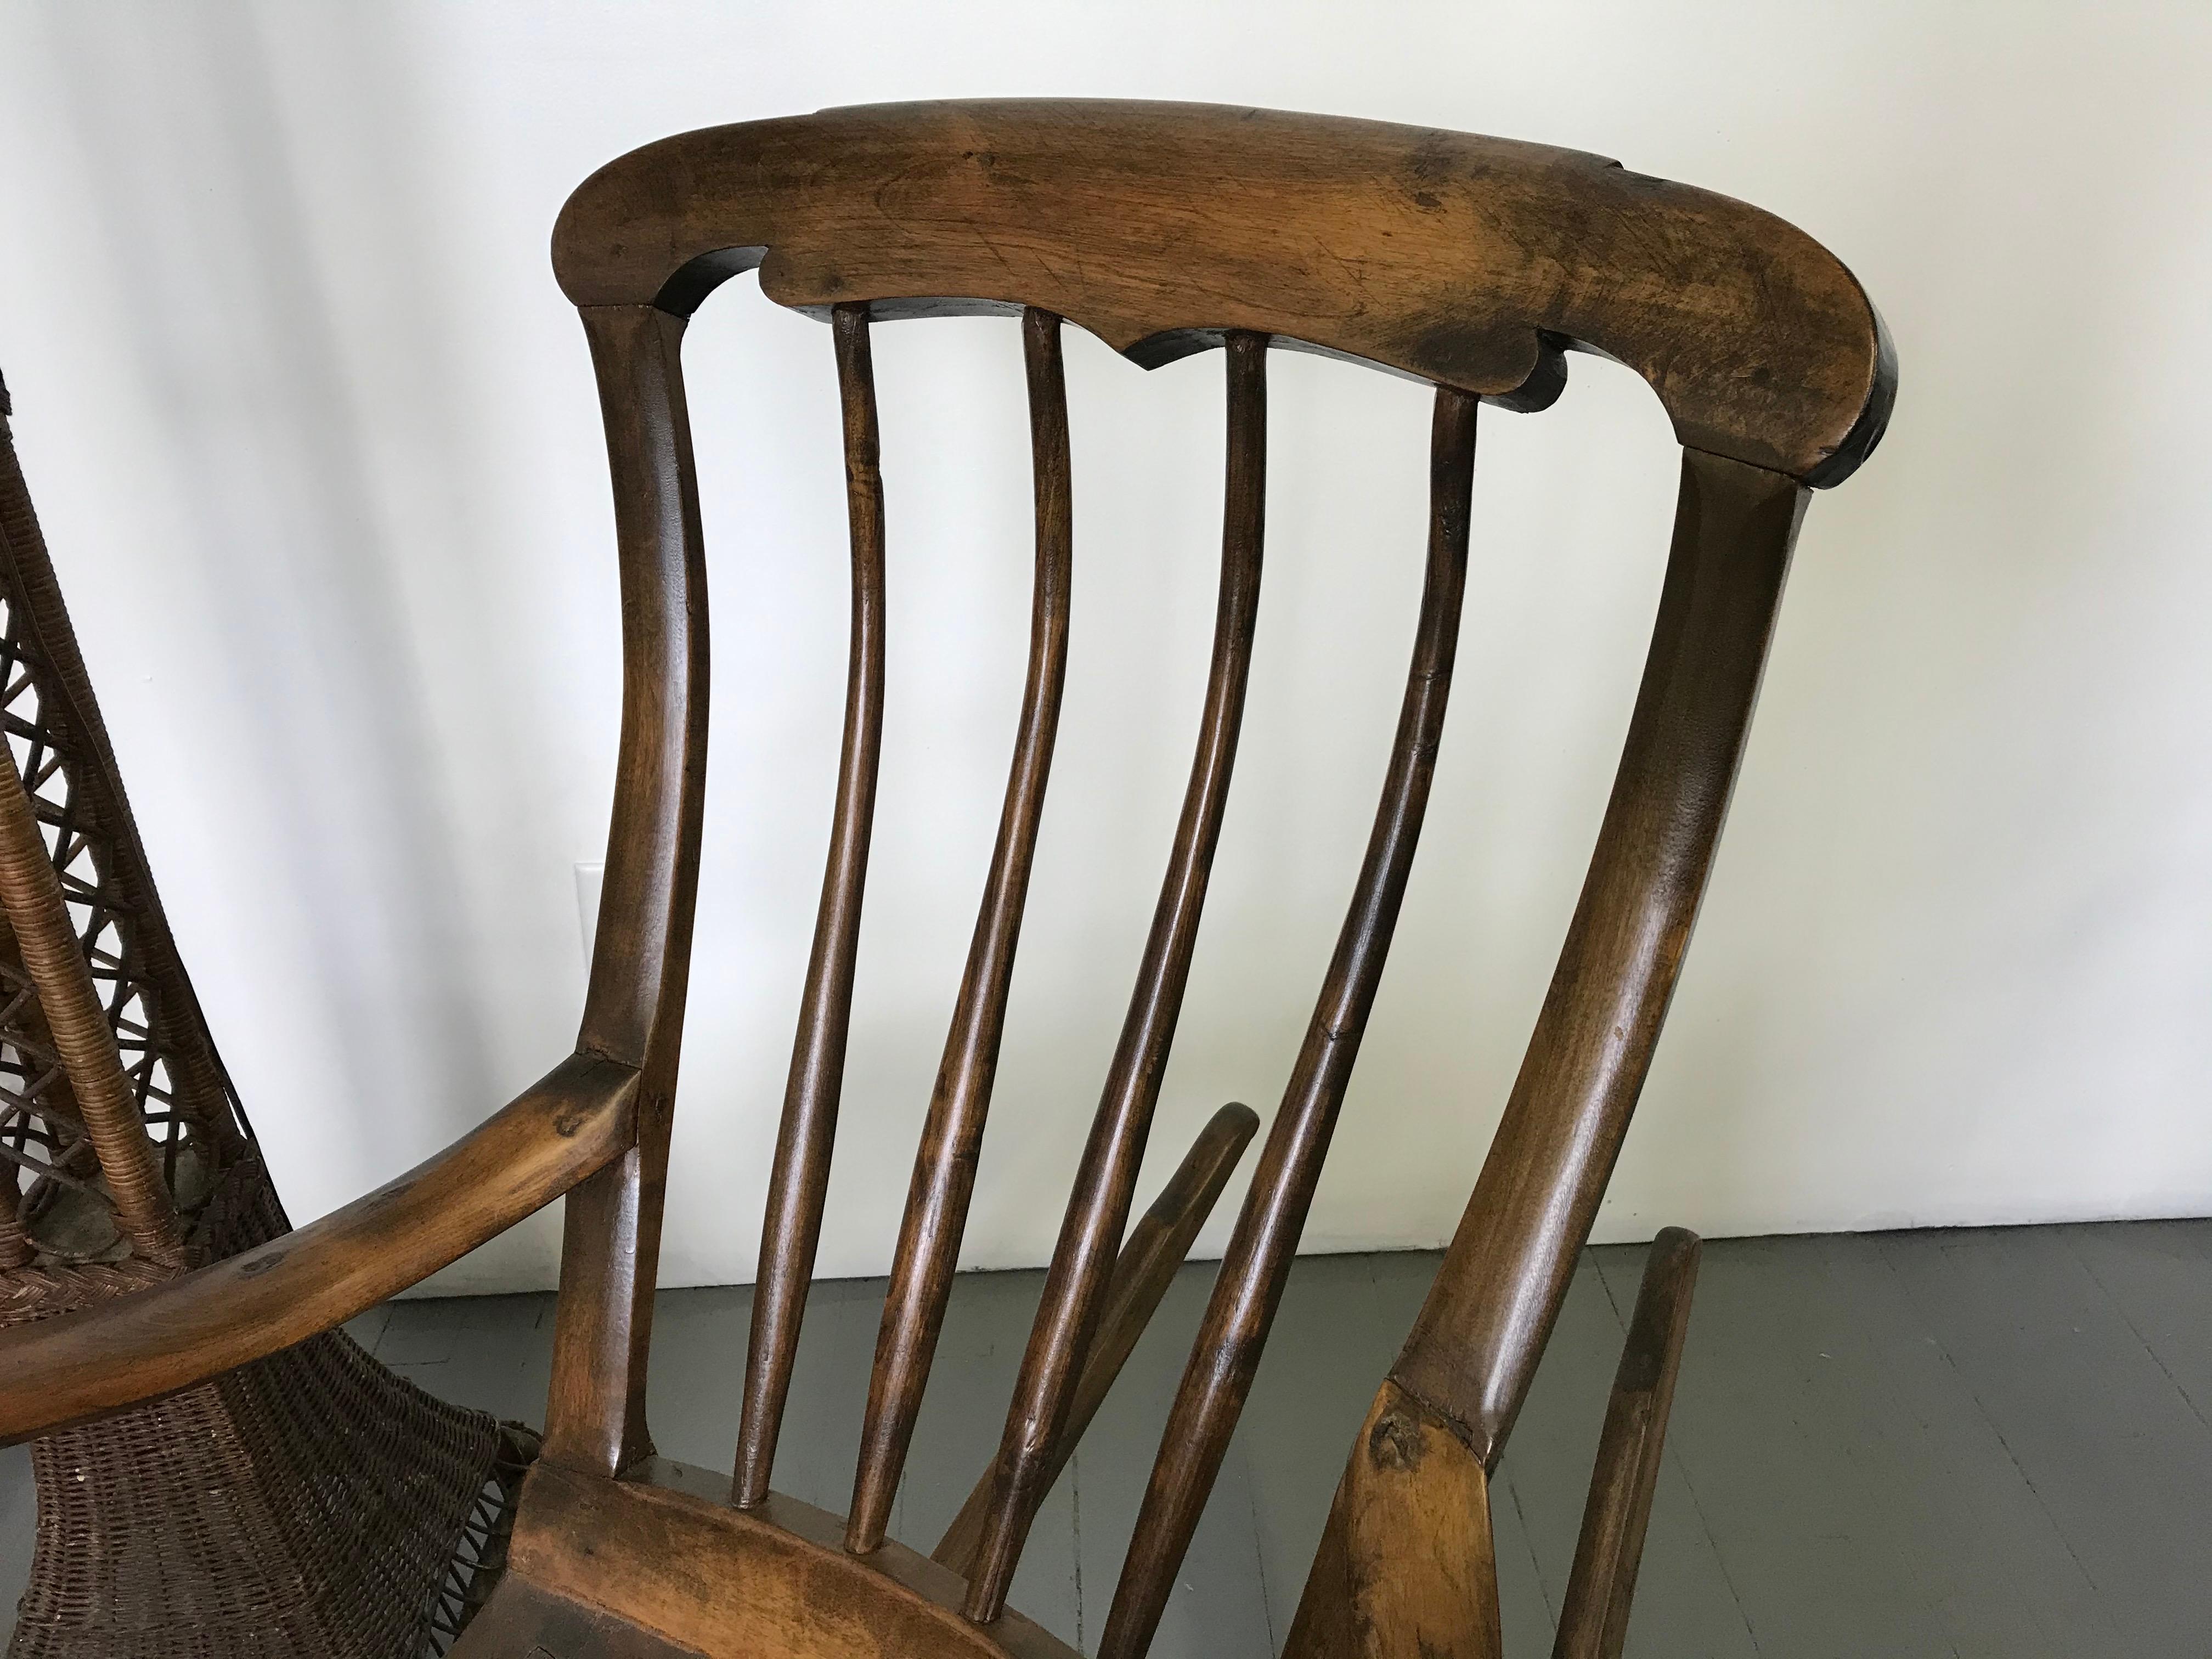 Remarkably original artisanal handcrafted rocking chair from Sweden circa 1840-1850. Stained birch wood. Entirely handmade. All joints are pegged and doweled. Splats and rails were steam bent. Seat boards hand planed. Arm supports are so organic and